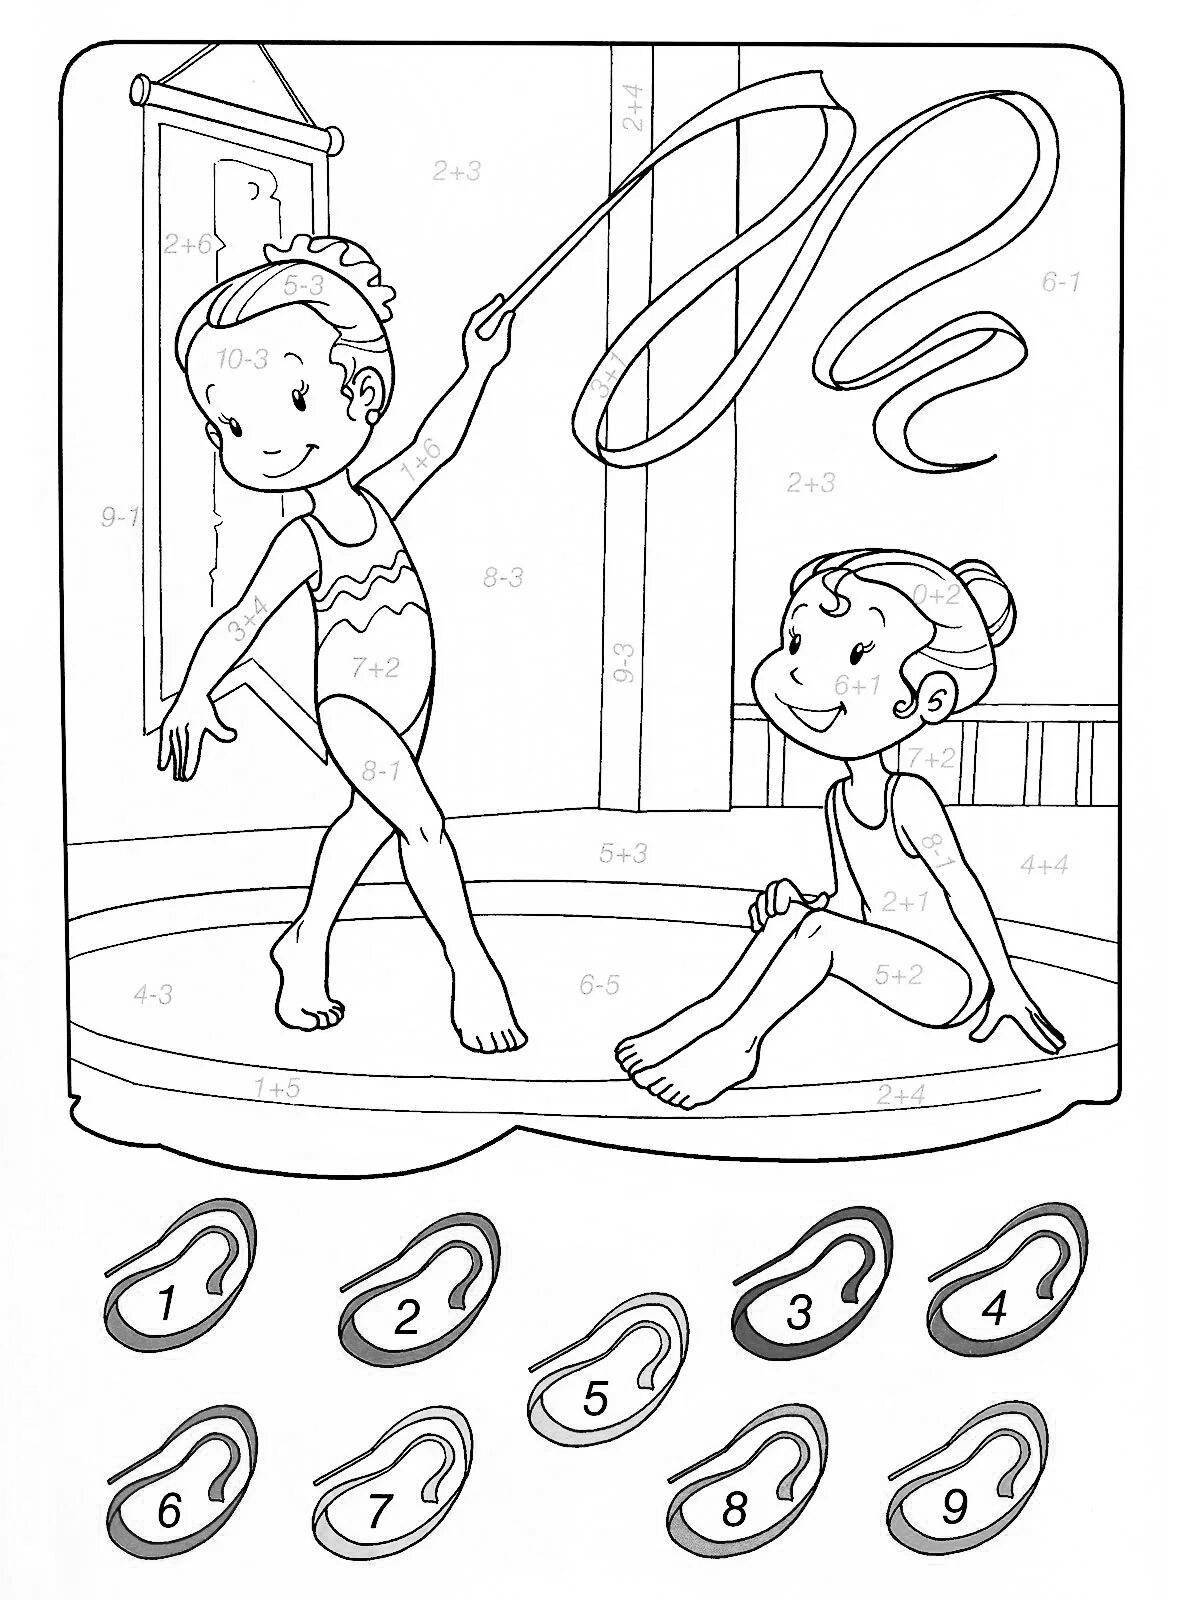 Awesome health and sports coloring pages